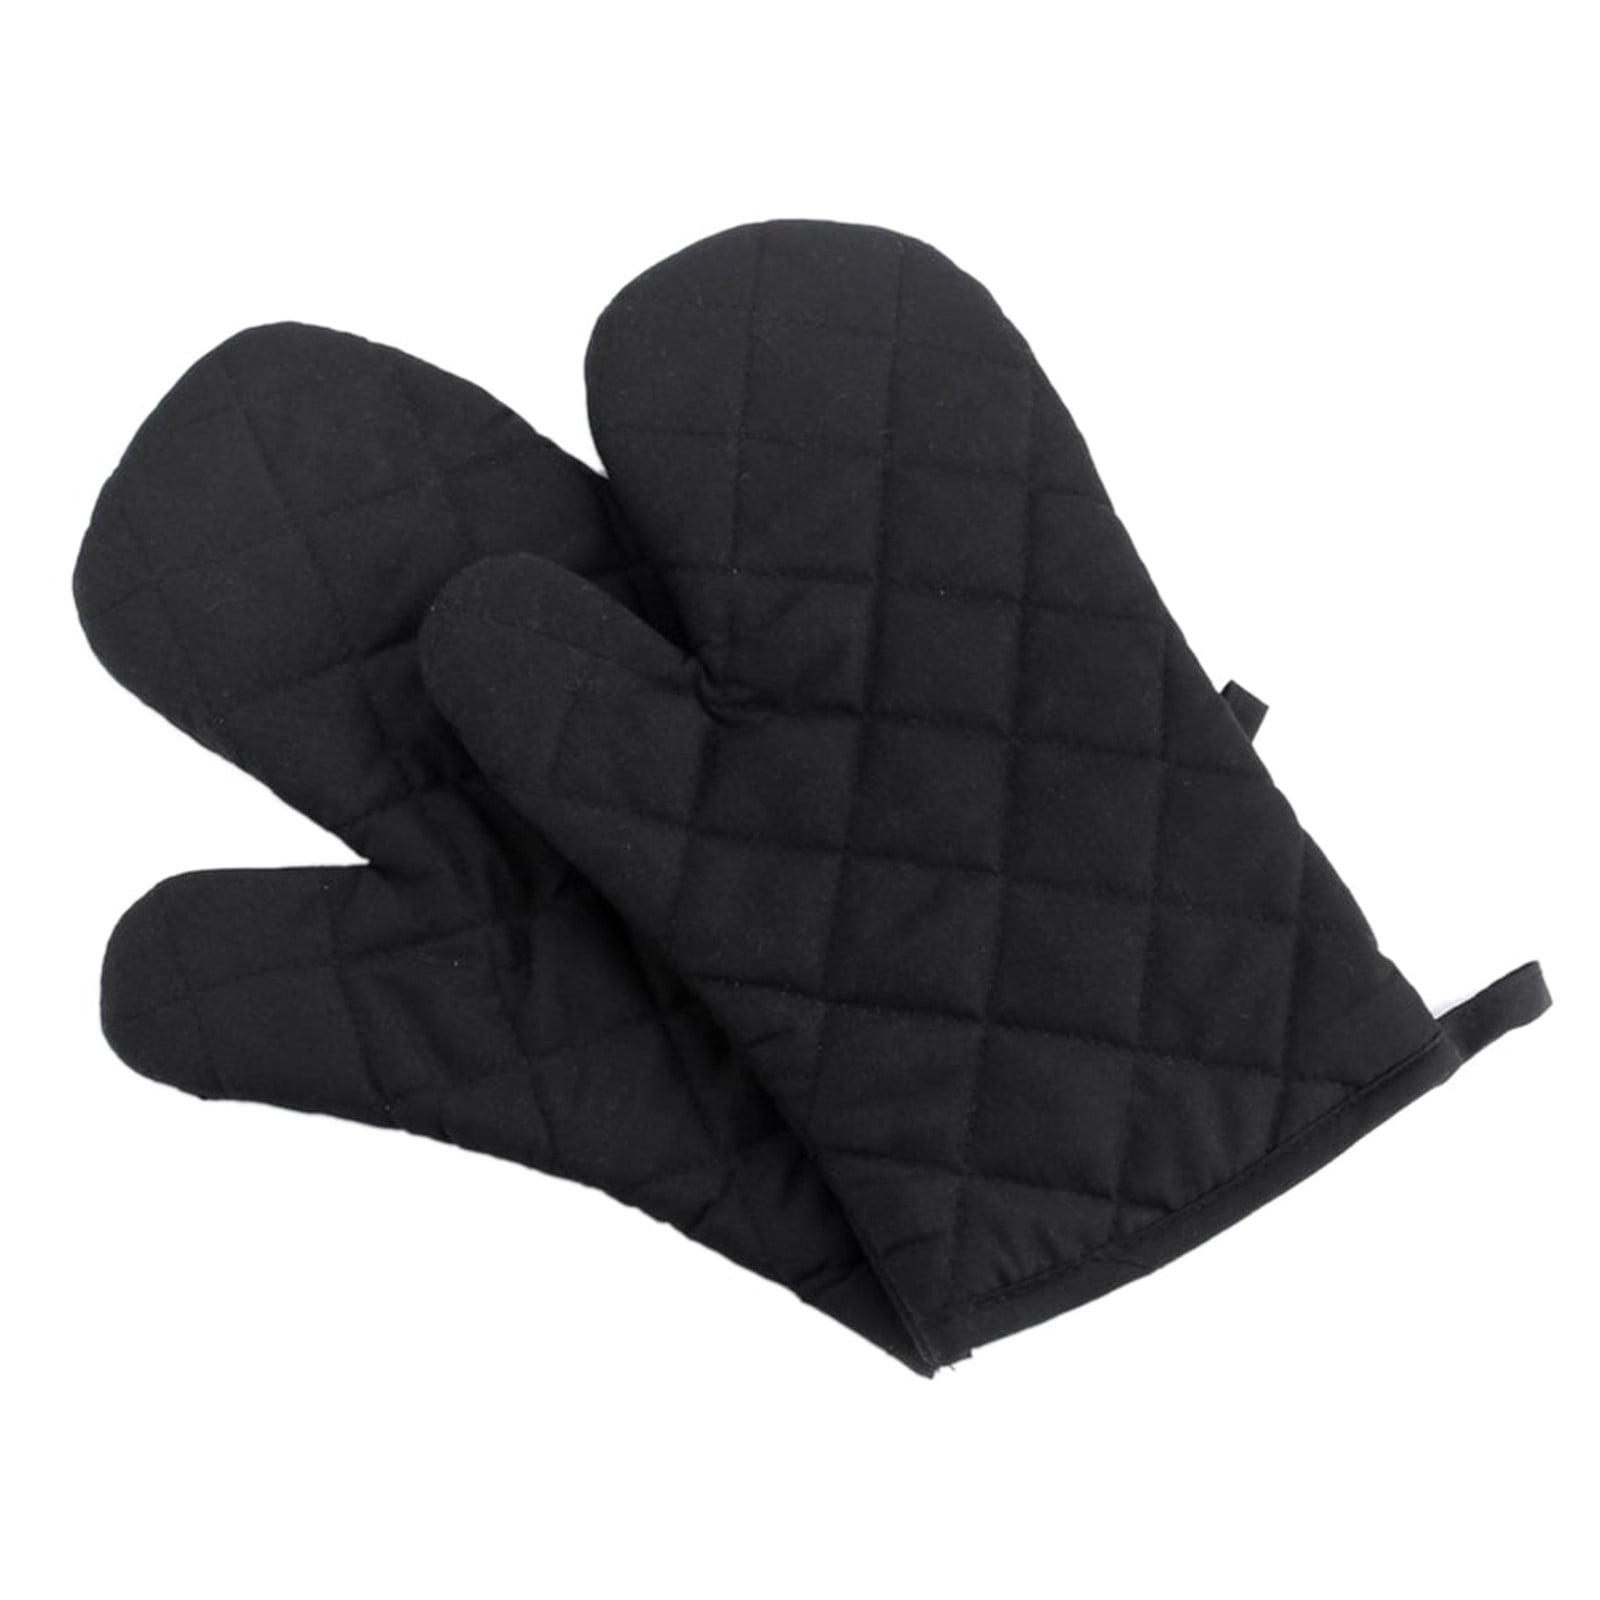 1 Pair Short Oven Mitts, Heat Resistant Silicone Kitchen Mini Mitts For 500  Degrees, Non-slip Grip Surfaces And Hanging Loop Gloves, Baking Grilling B